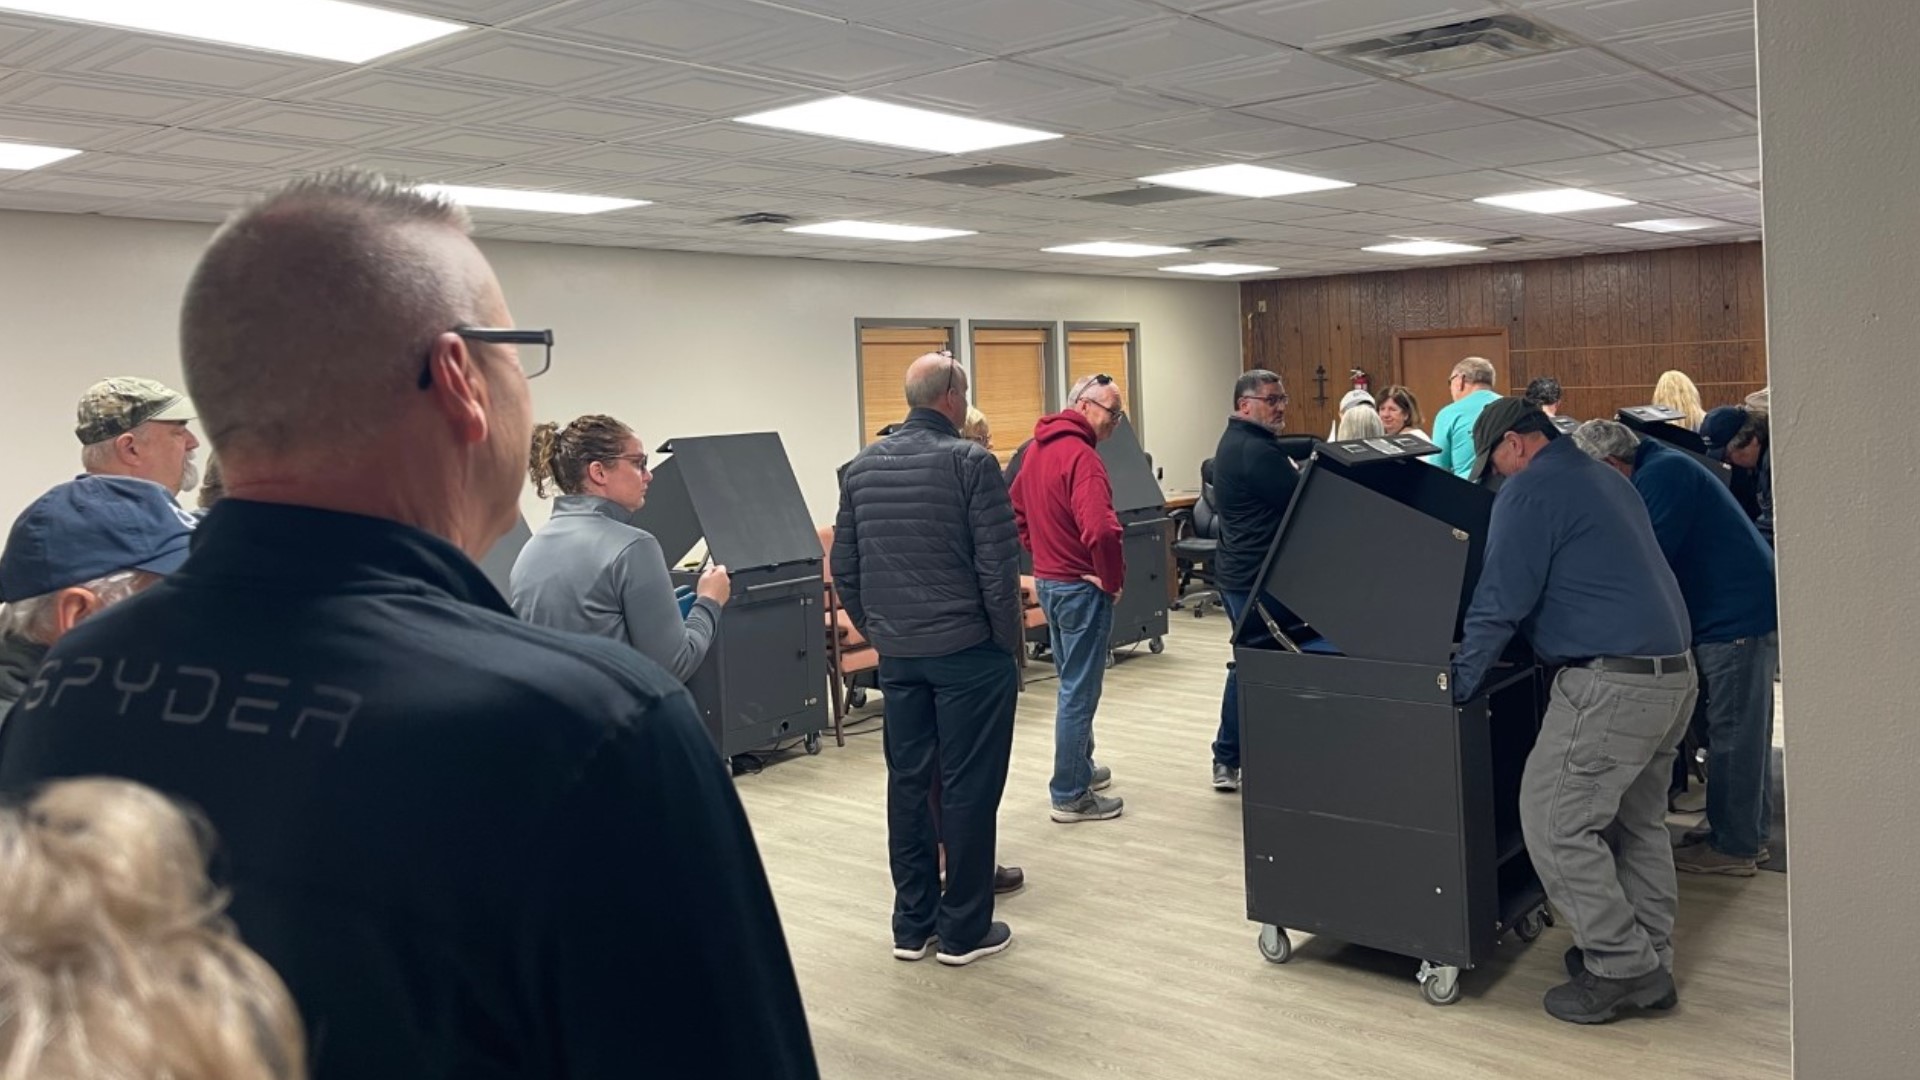 Voters at some precincts indicate that voting machines are running out of paper, and election officials scrambled to address the situation.